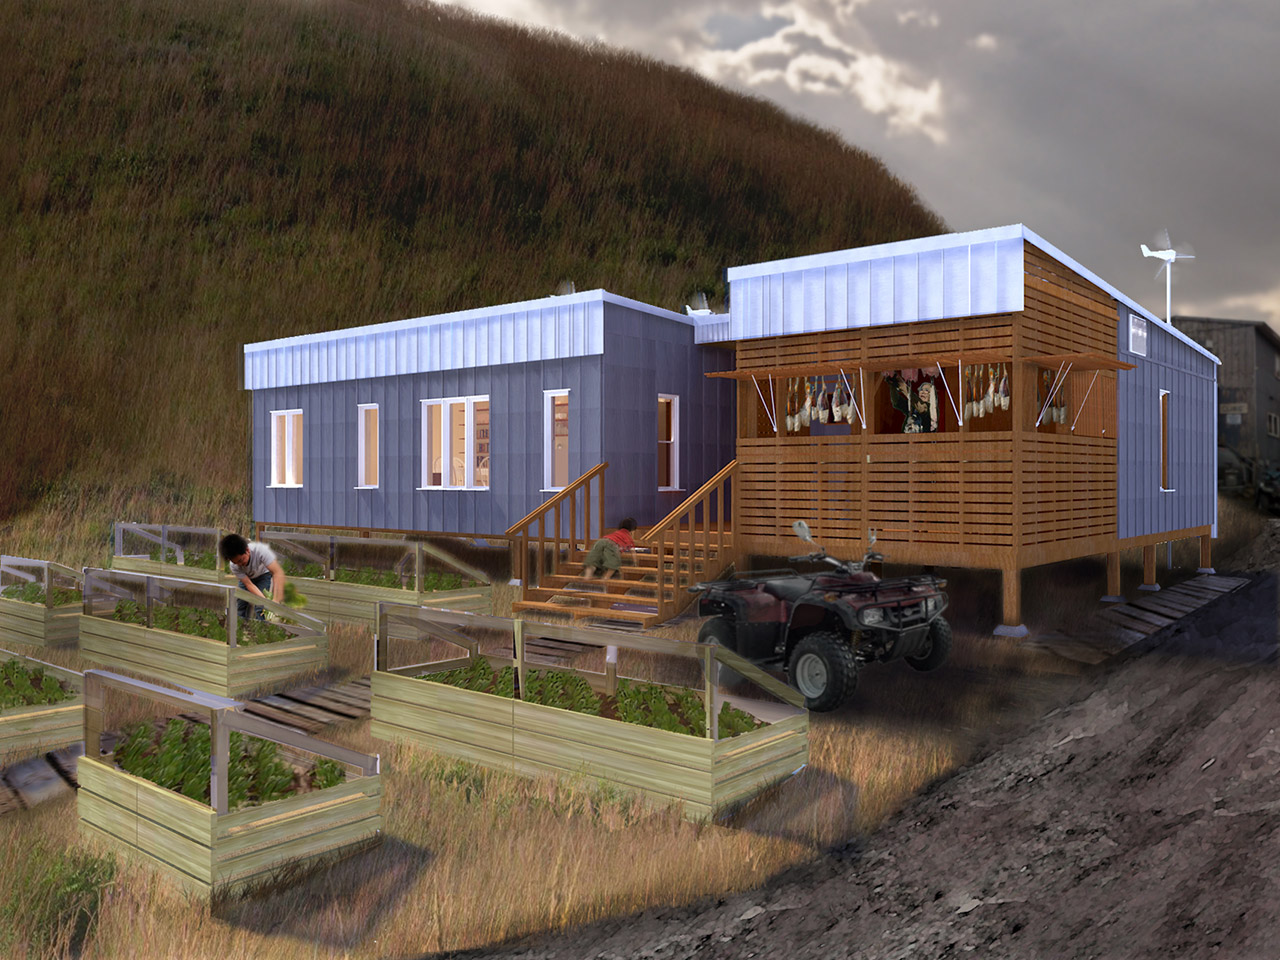 Belknap and Swain - House for a Windy Island, second place in the Living Aleutian Home Design Competition 2012